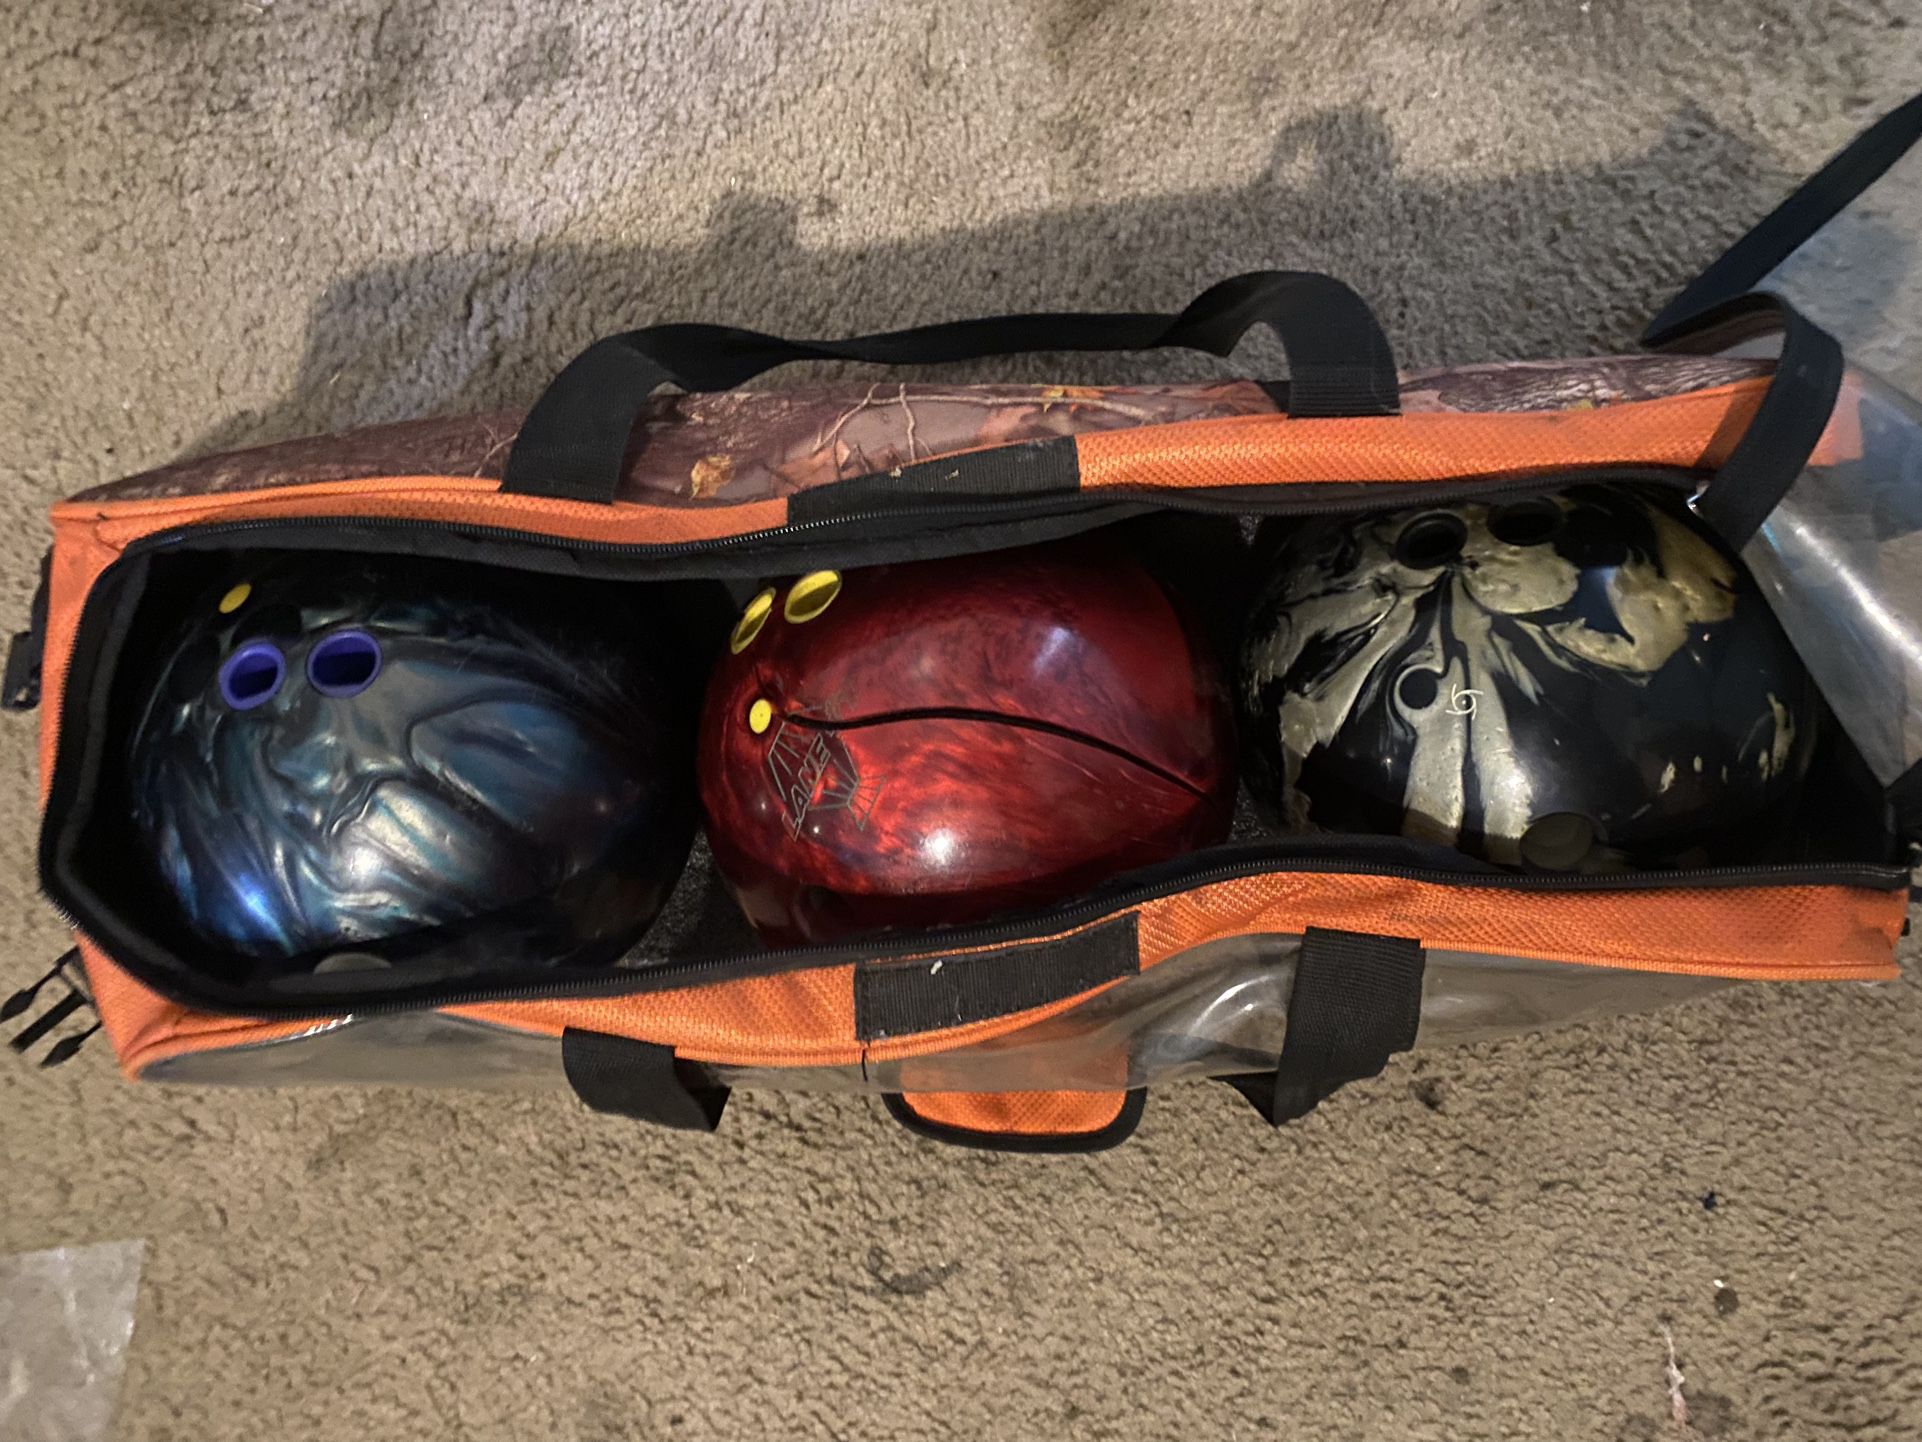 Bowling Balls with Case